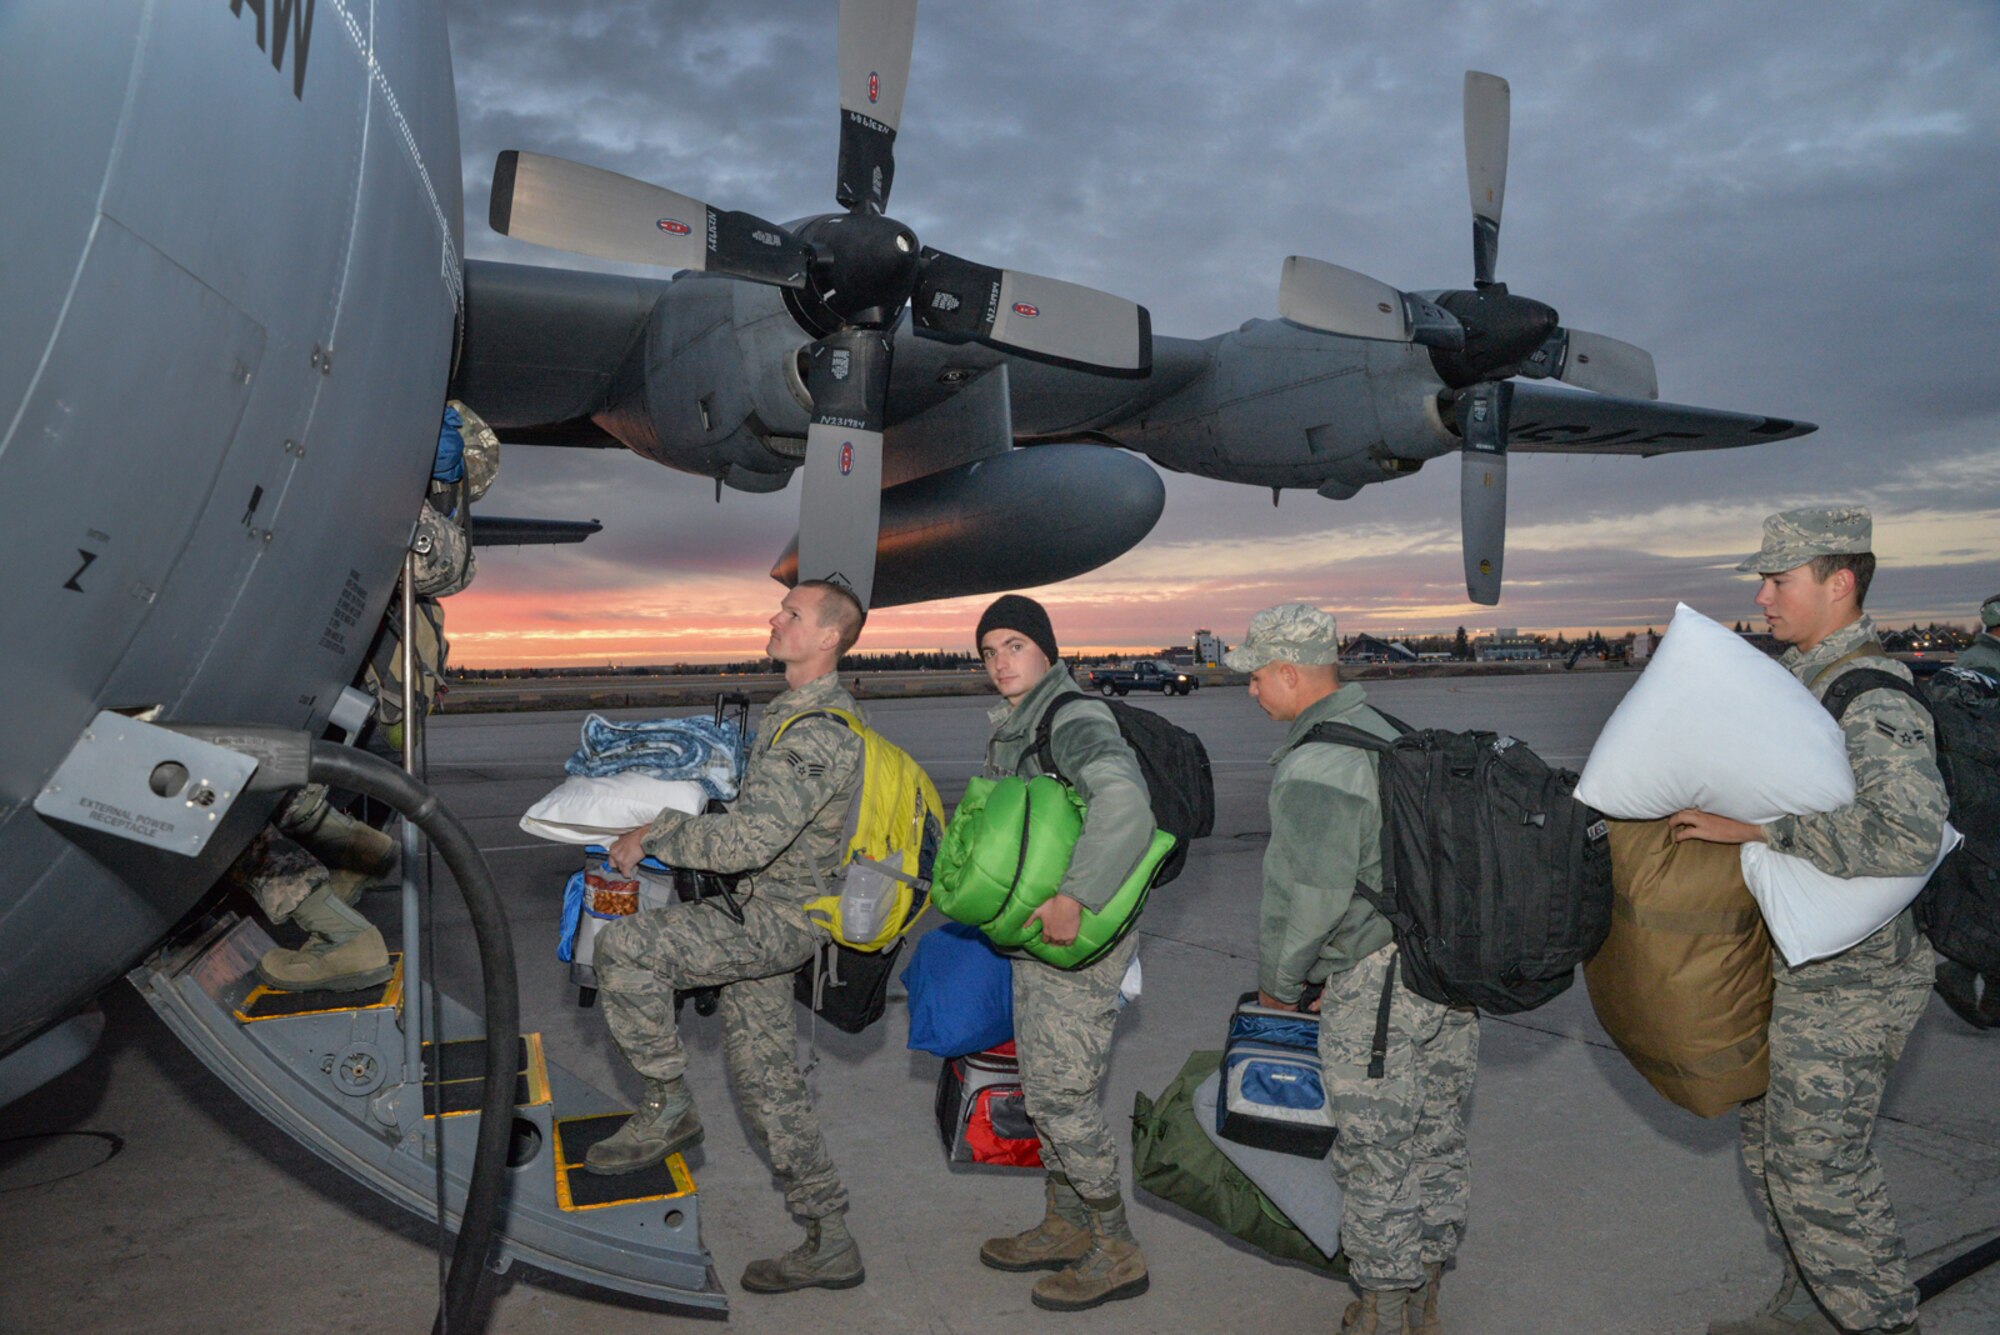 U.S. Air Force Airmen from the 153rd Airlift Wing, Wyoming Air National Guard board a C-130H Hercules aircraft. Maintenance, Operations, and Logistics airmen deploy in support of the Overseas Contingency Operations in Southwest Asia. The Wyoming Air National Guard Airmen and aircraft are relieving members of the 130th Airlift Wing, Charleston West Virginia. (U.S. Air National Guard photo by Master Sgt. Charles Delano/released)